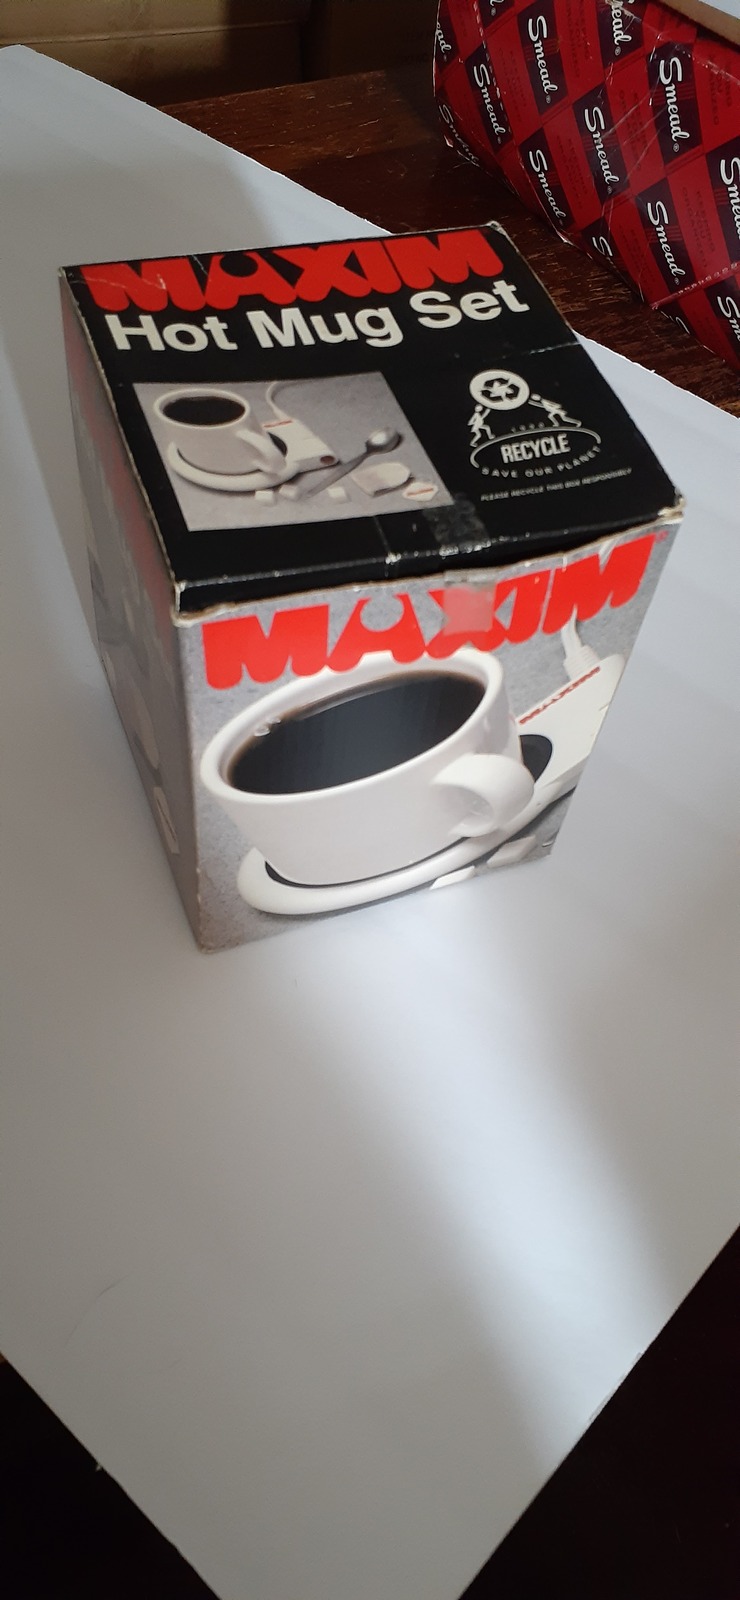 MAXIM Hot Mug Stoneware Set in Box (Cup, SS Spoon and Electric Warmer) New Box - $24.99